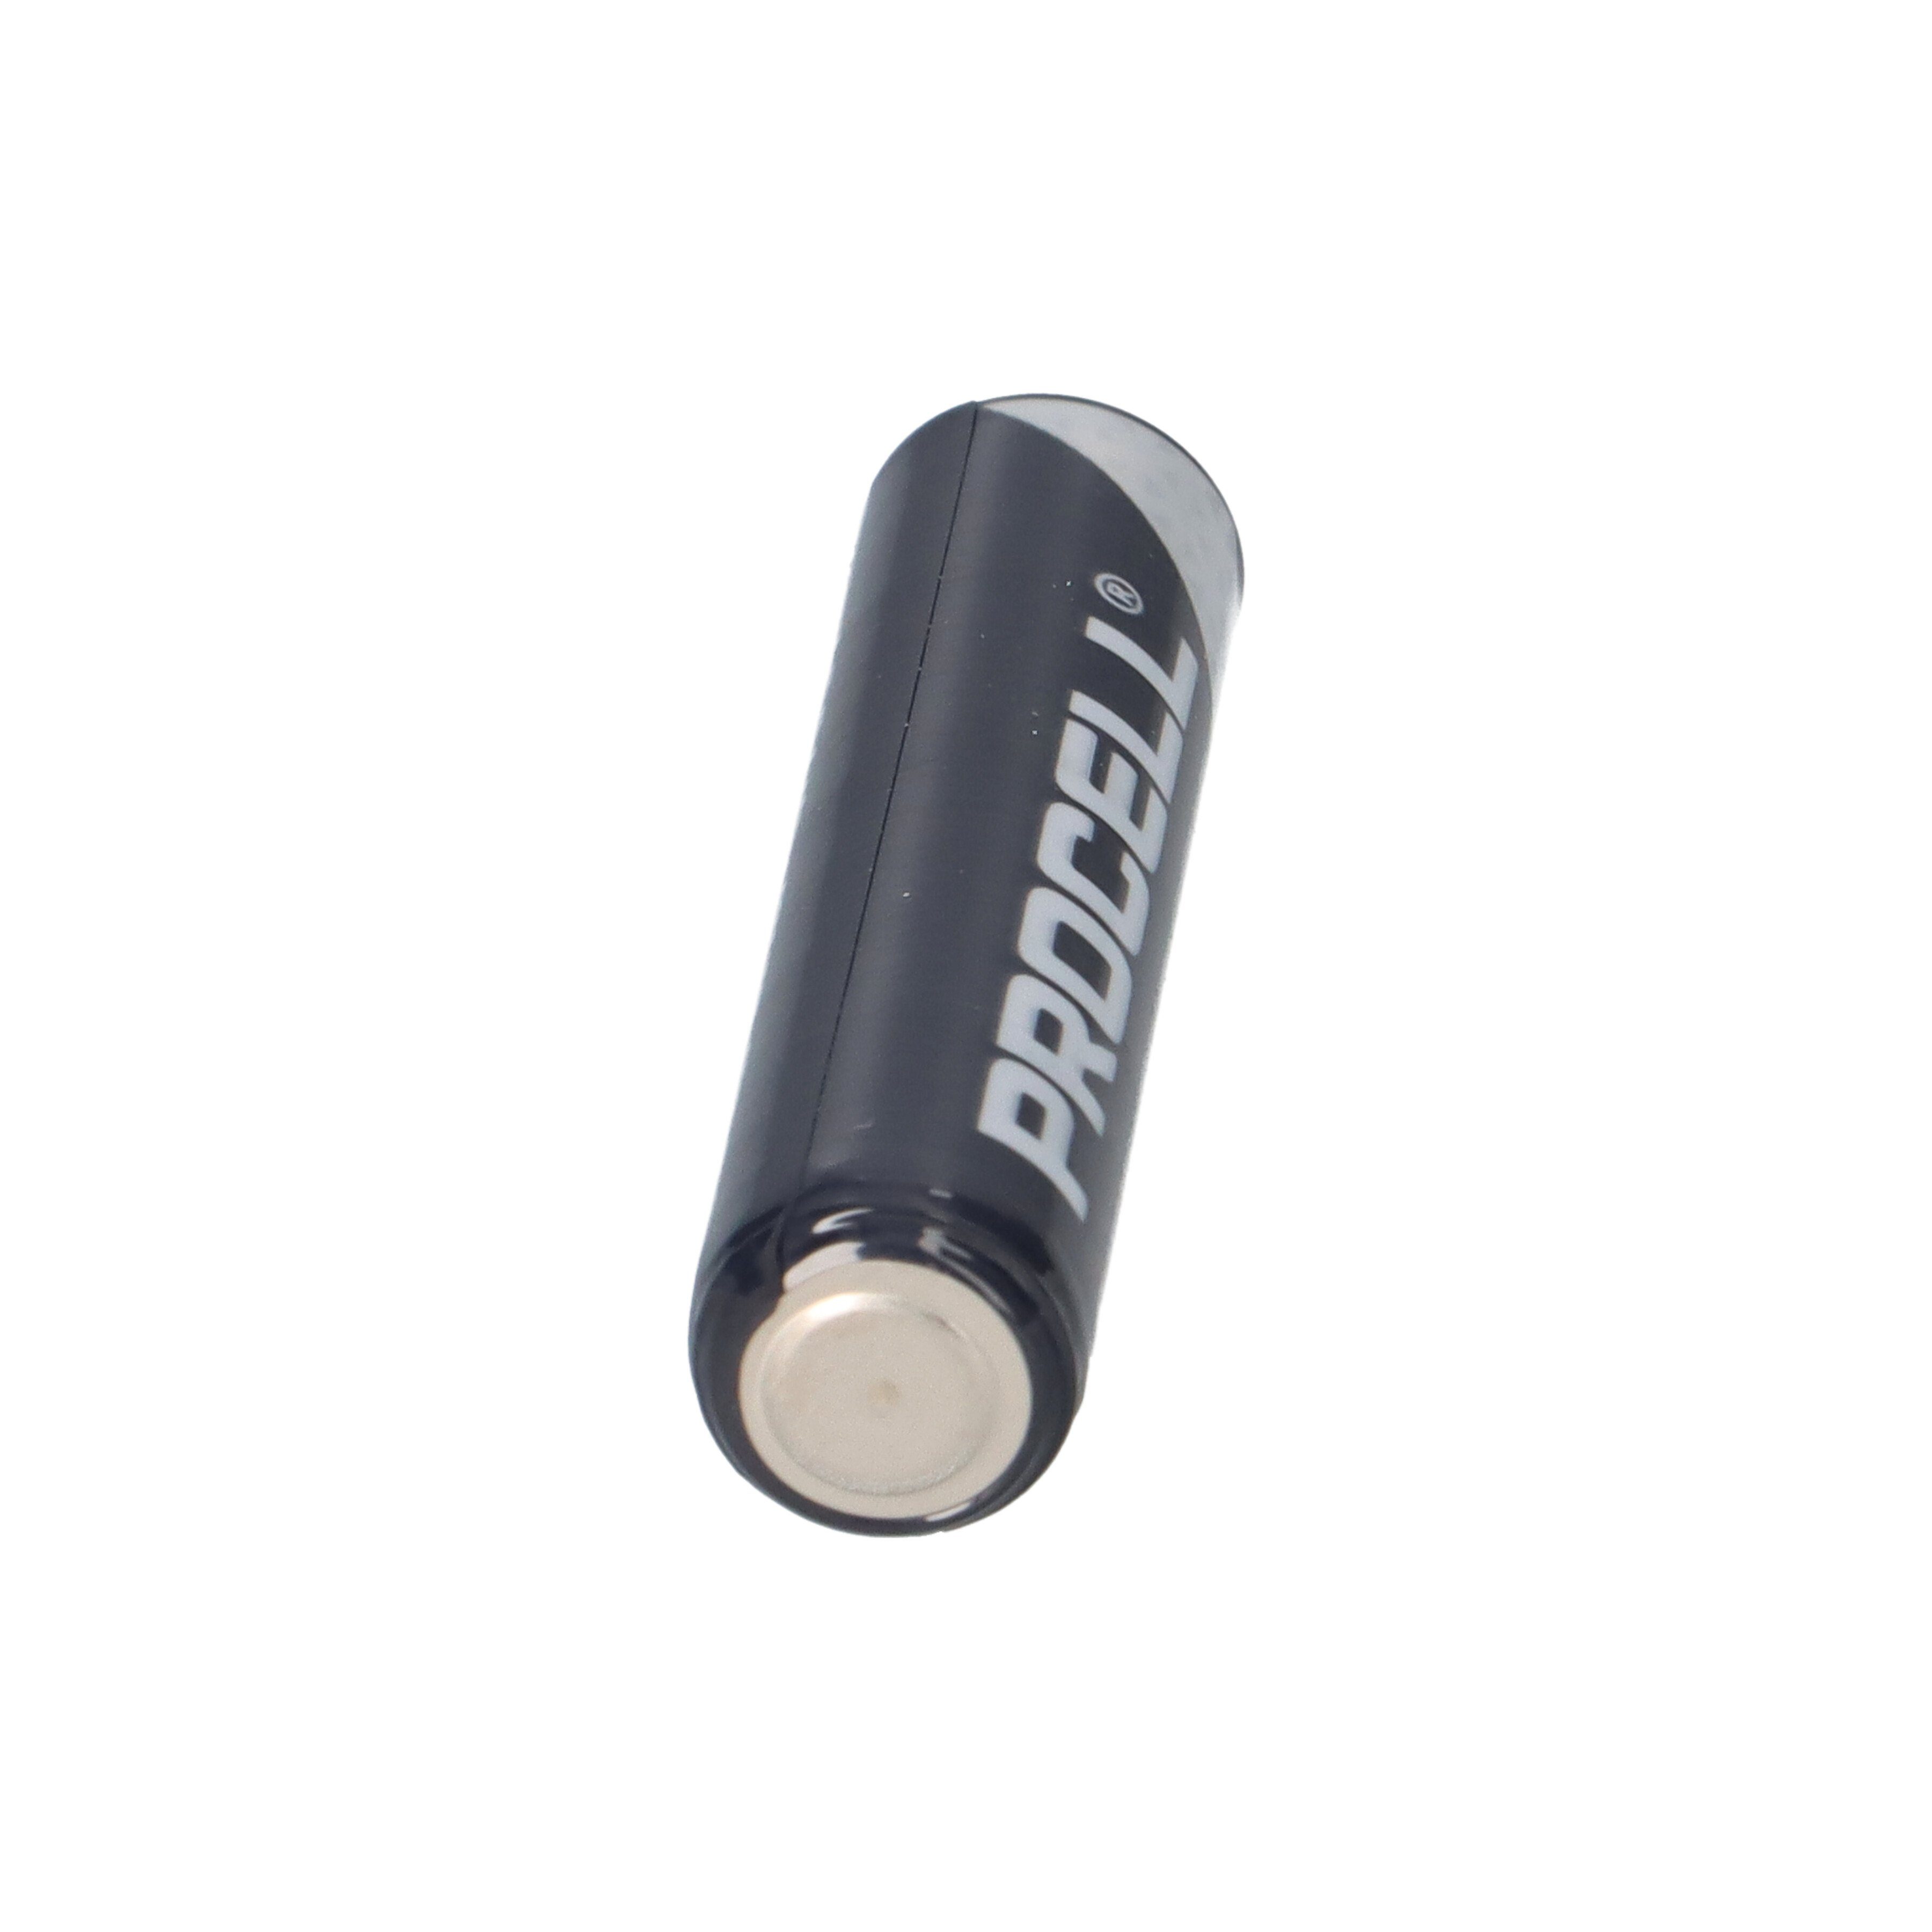 MN2400 Procell Batterie Batterie 50x Duracell AAA Micro